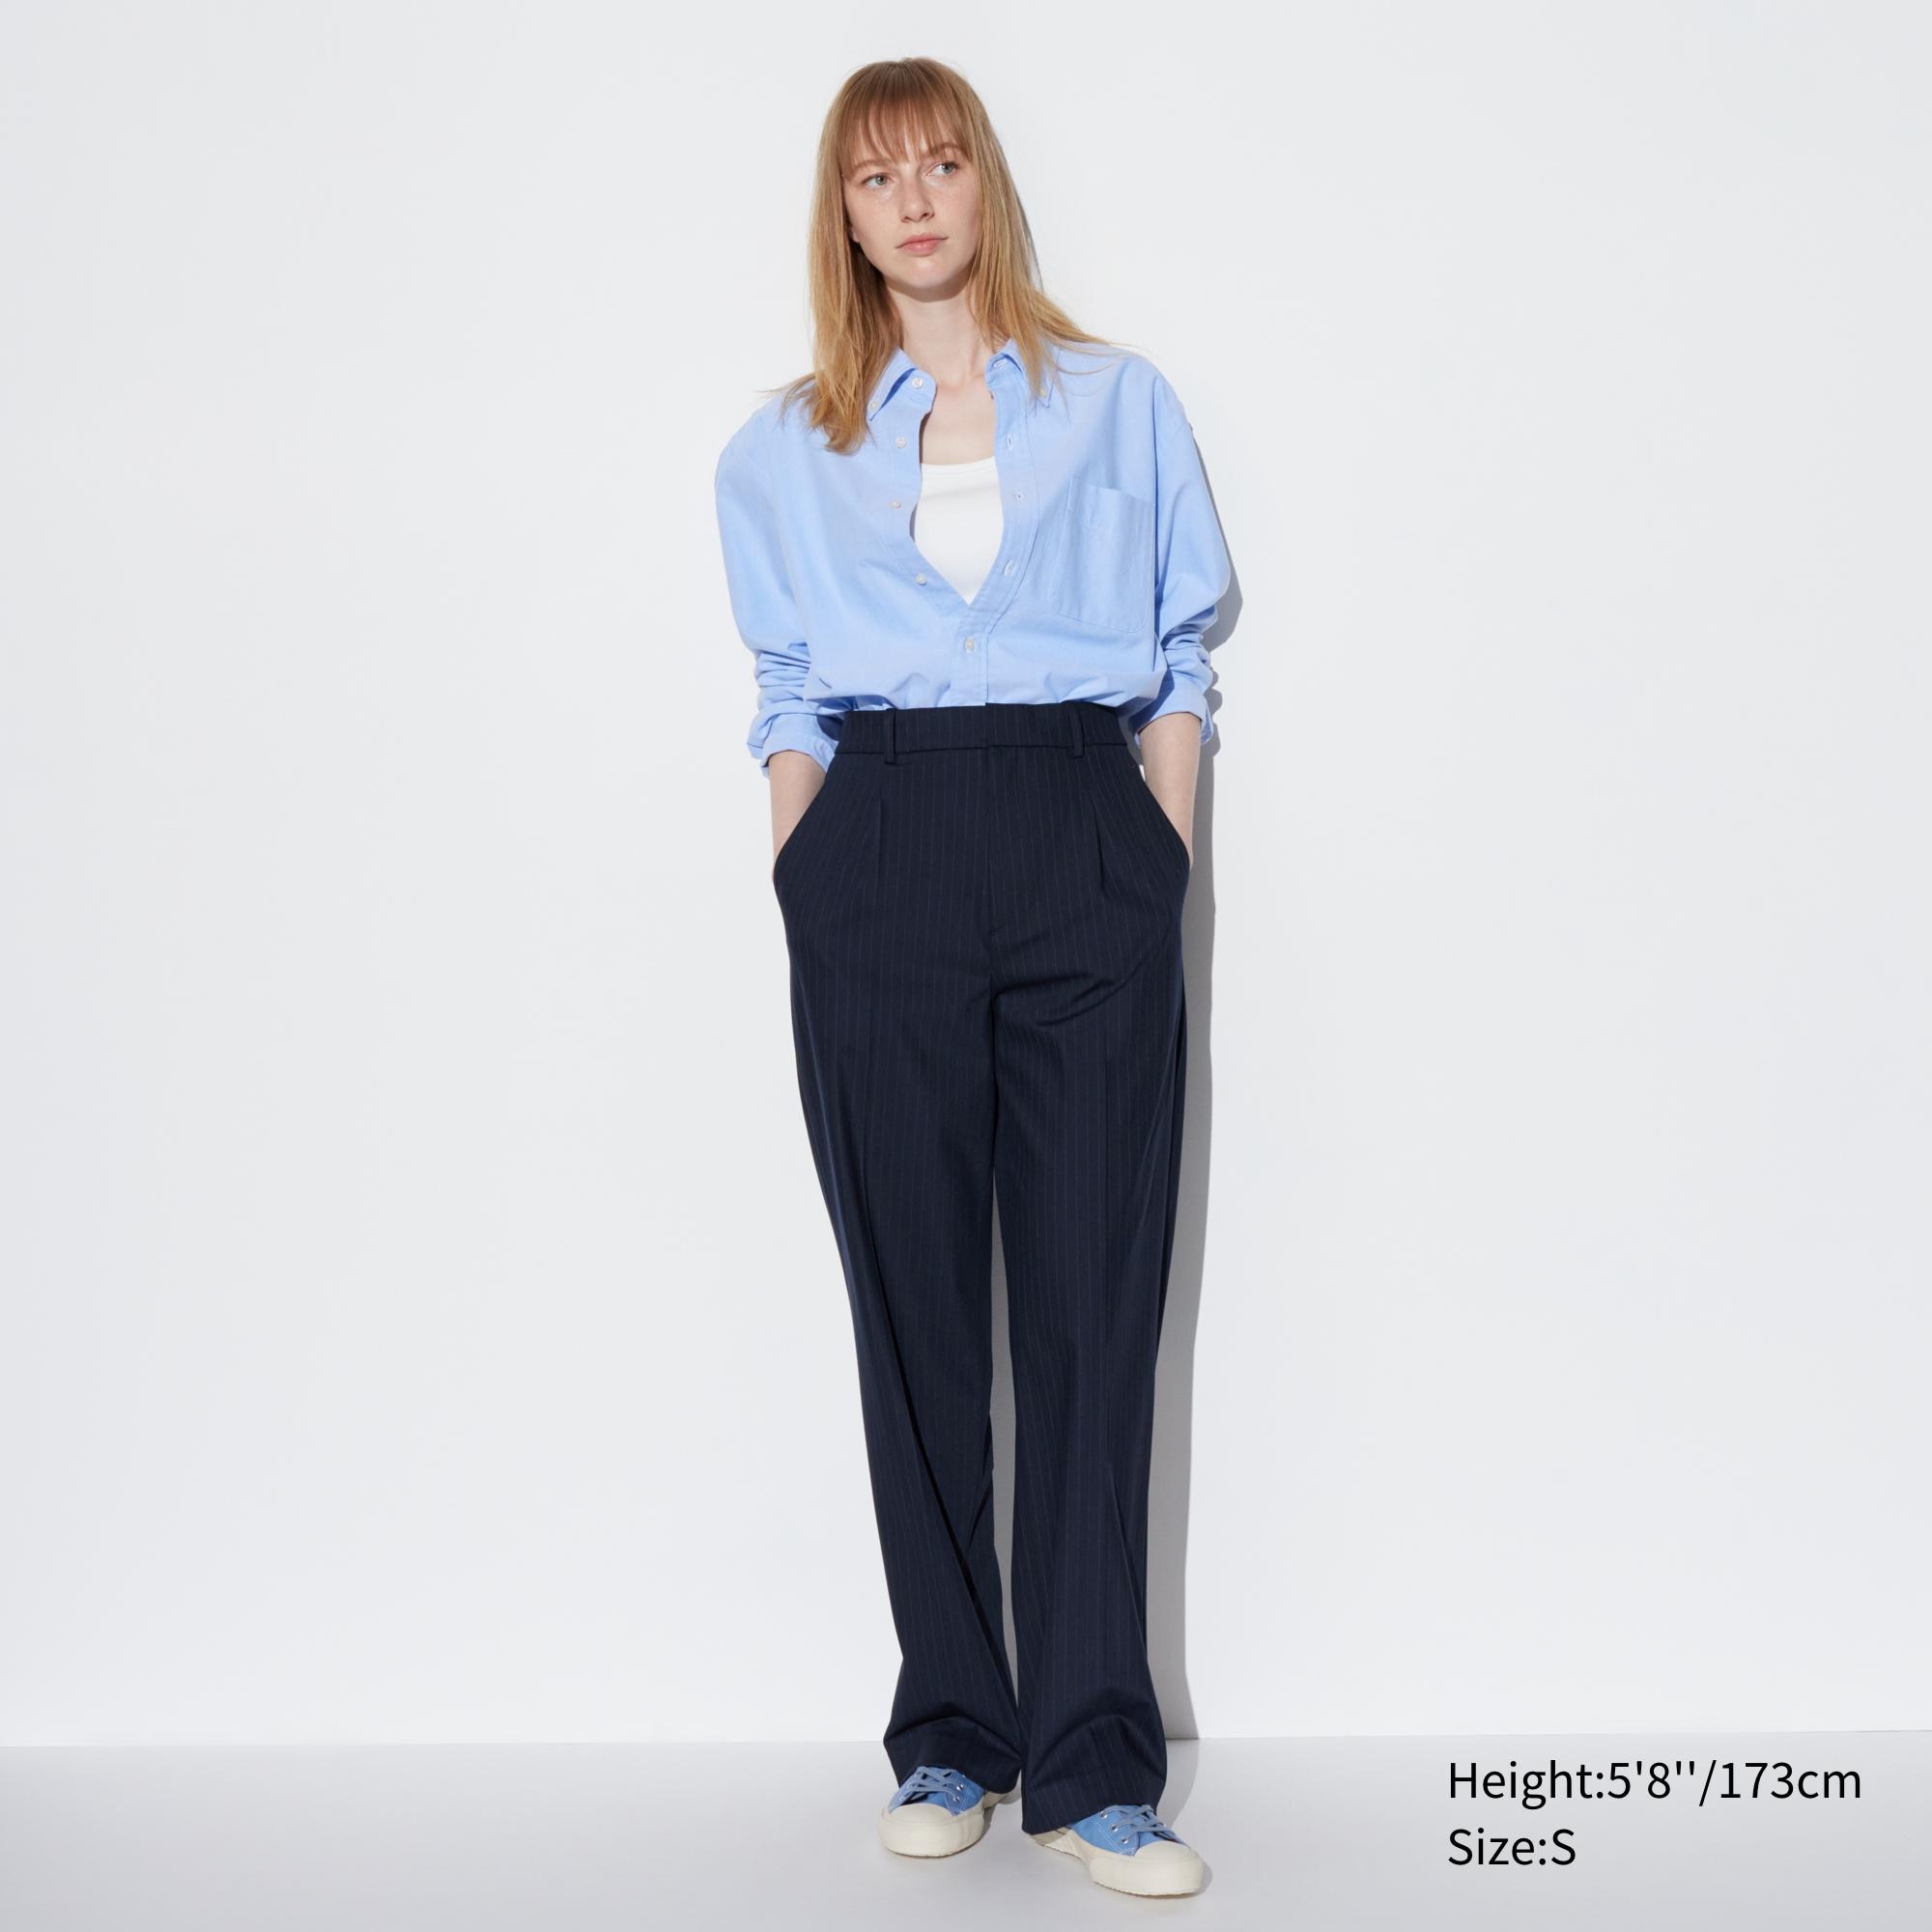 UNIQLO Malaysia - Get to know Smart Style Ankle Pants for... | Facebook